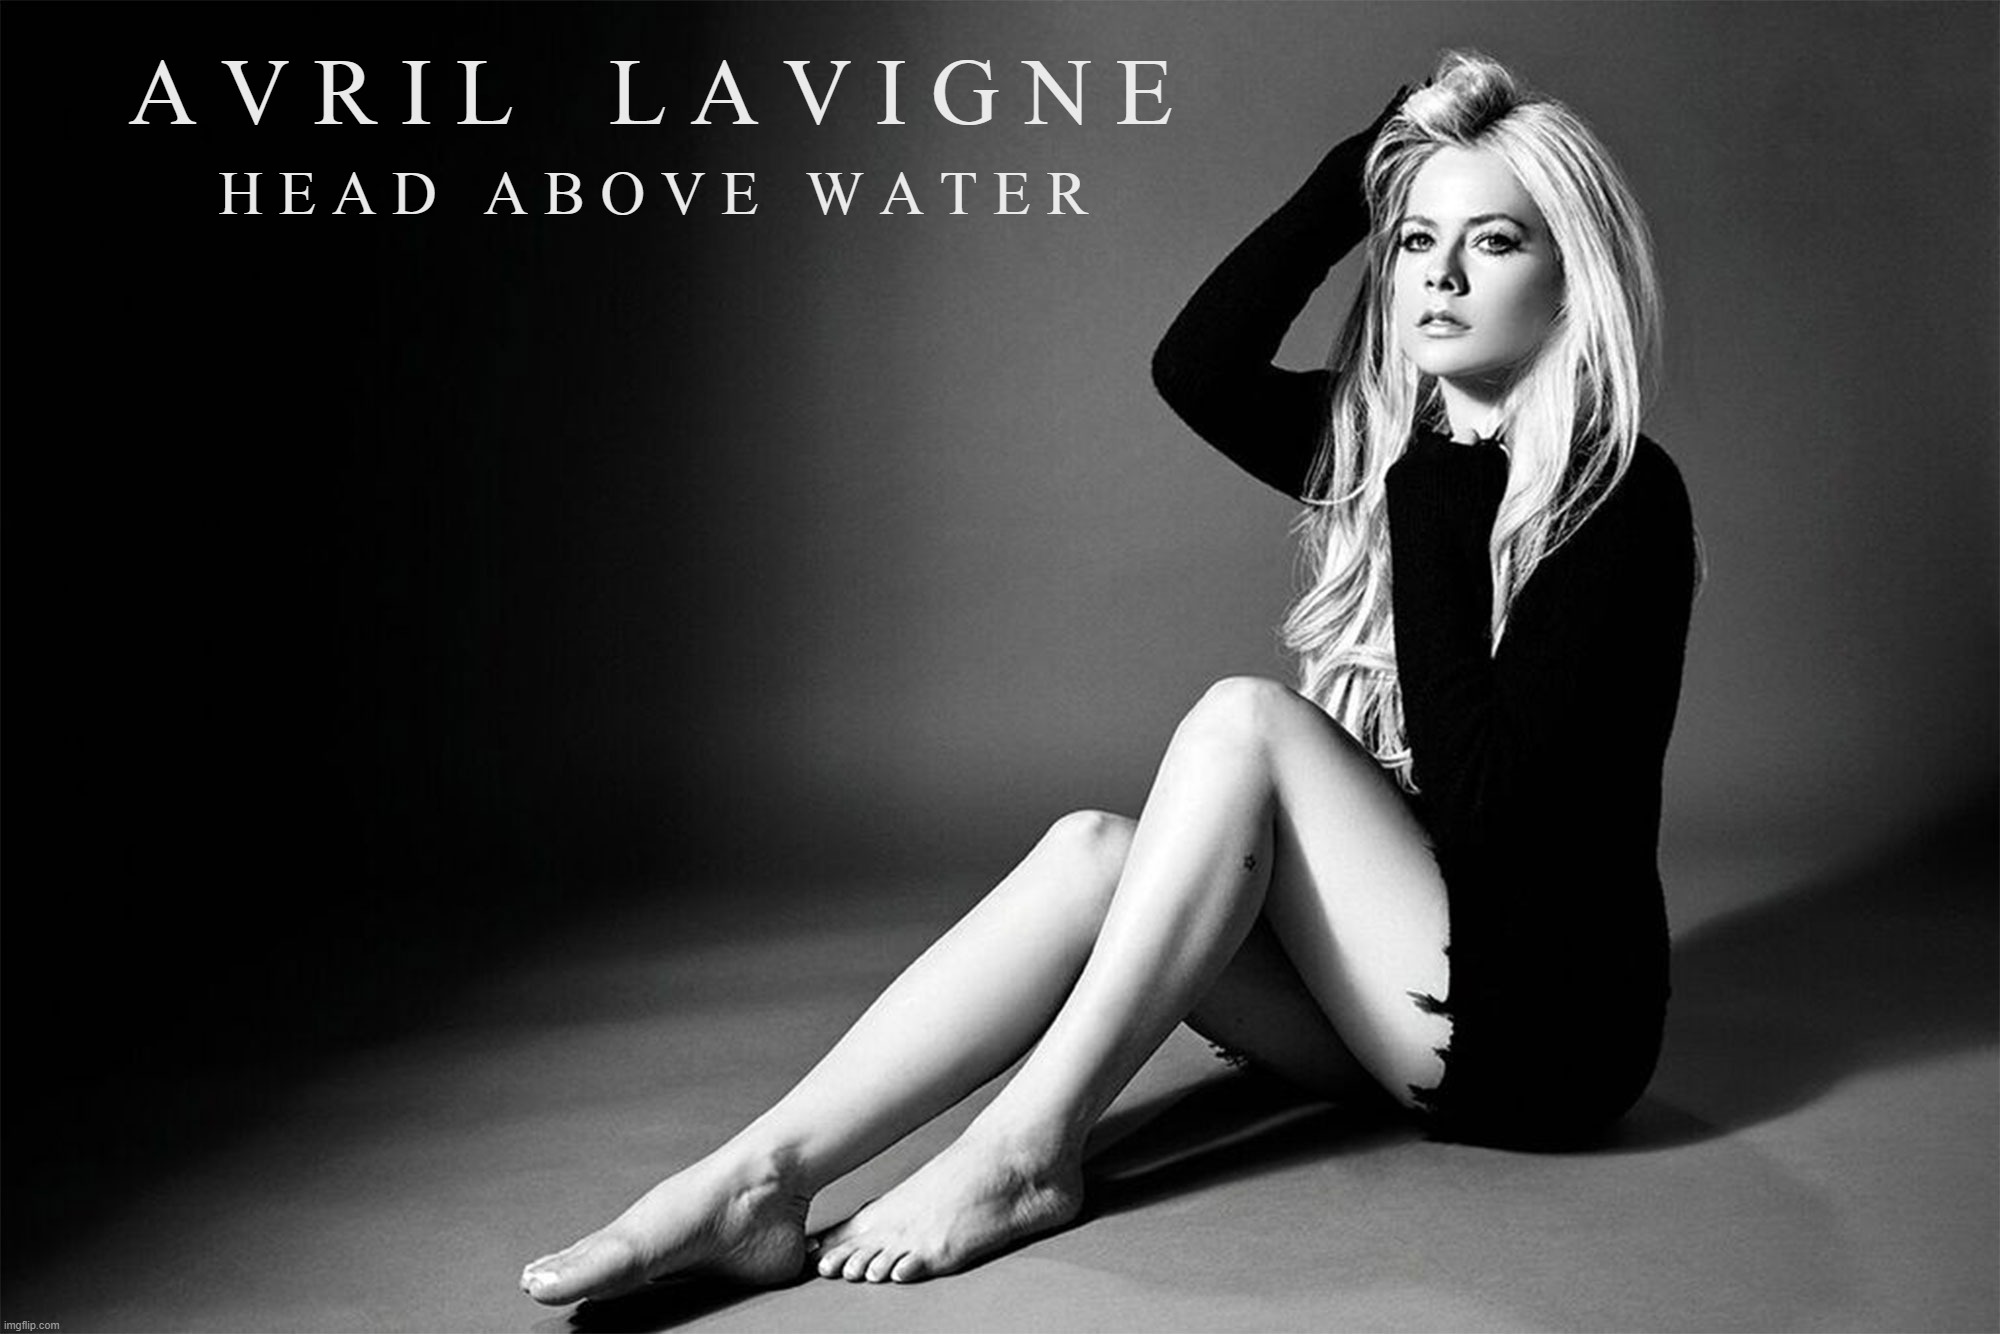 Avril Lavigne HEAD ABOVE WATER facebook cover photo |  A V R I L    L A V I G N E; H E A D   A B O V E   W A T E R | image tagged in avril lavigne,head above water,facebook,wallpapers,music,profile picture | made w/ Imgflip meme maker